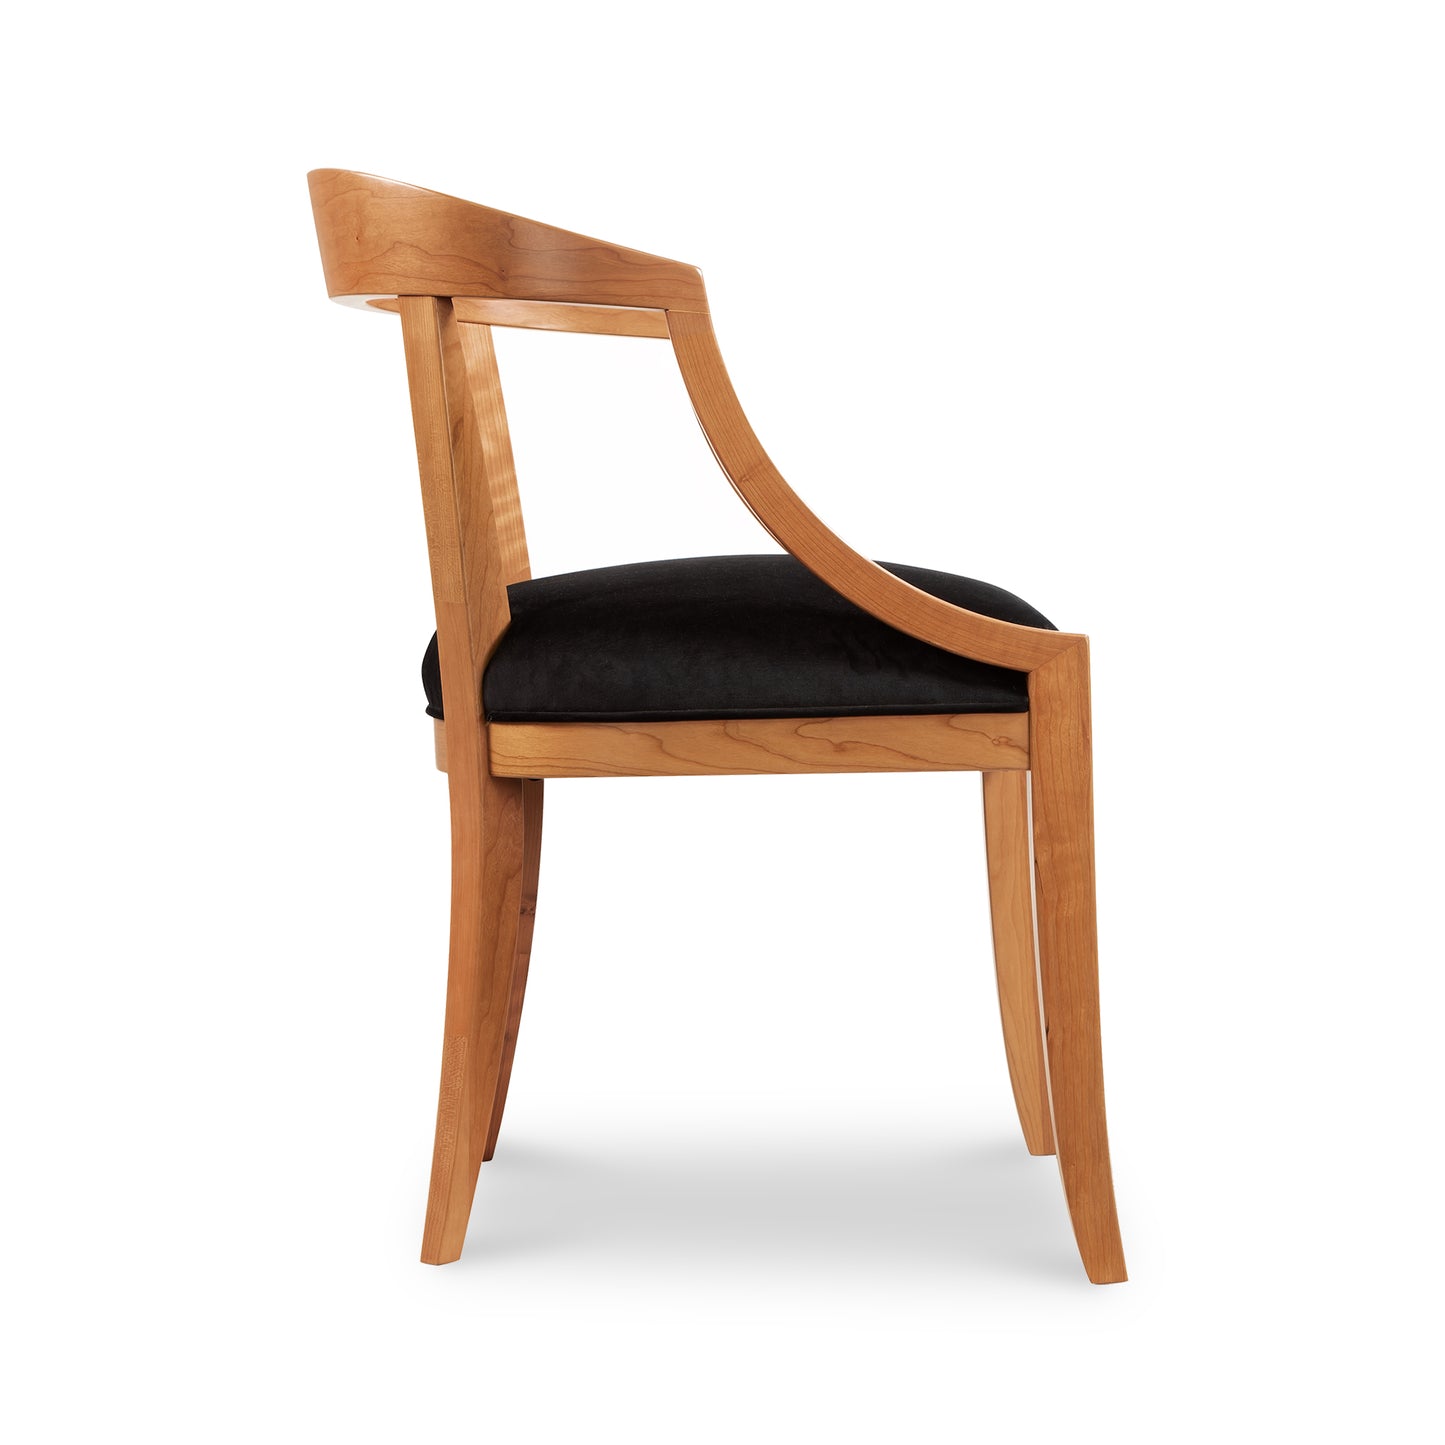 A wooden chair with black velvet upholstered seat.